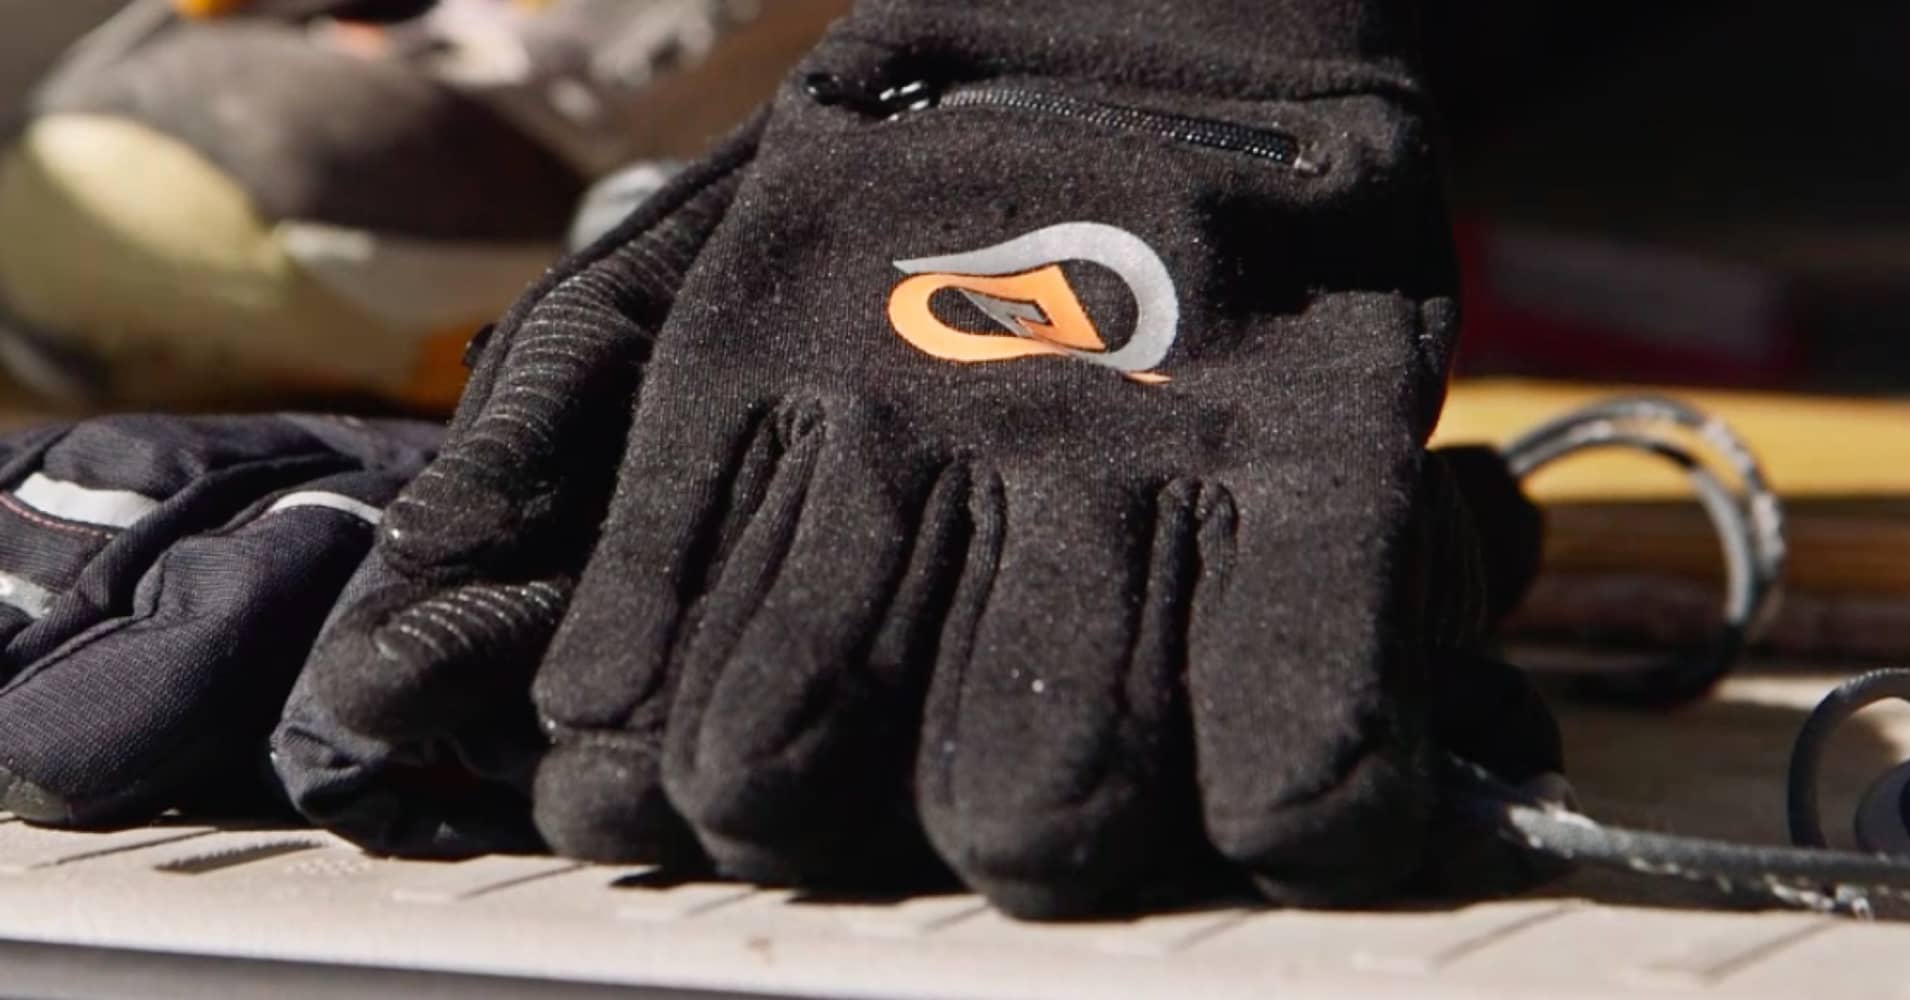 'Smart' glove that controls your phone